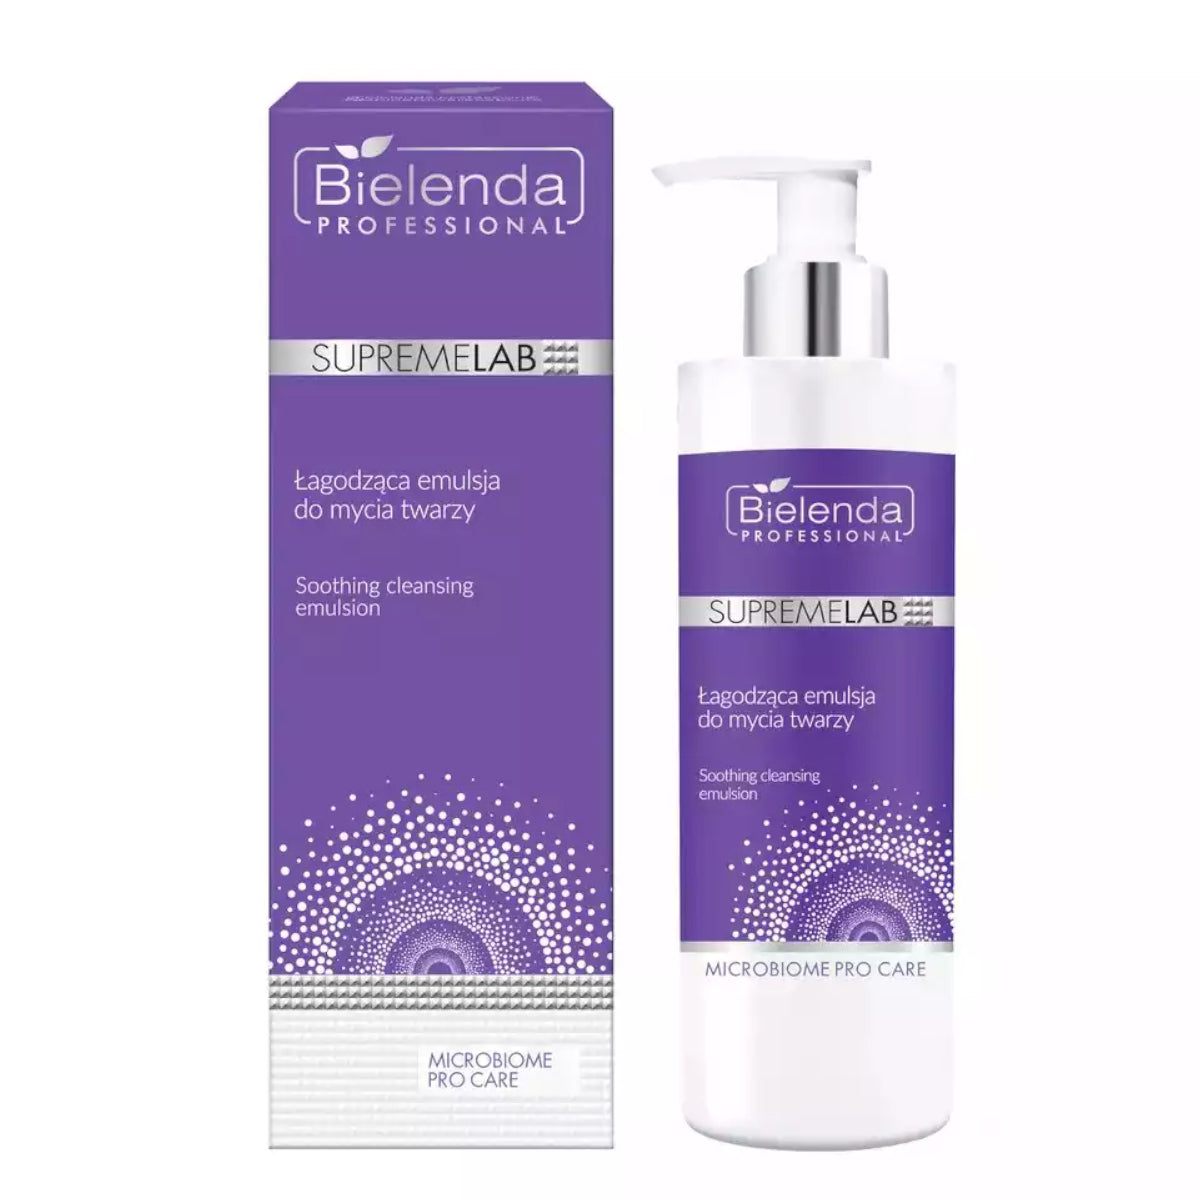 Bielenda Professional Supremelab Microbiome Pro Care Soothing Skincare Bundle Cleansing Emulsion - Roxie Cosmetics